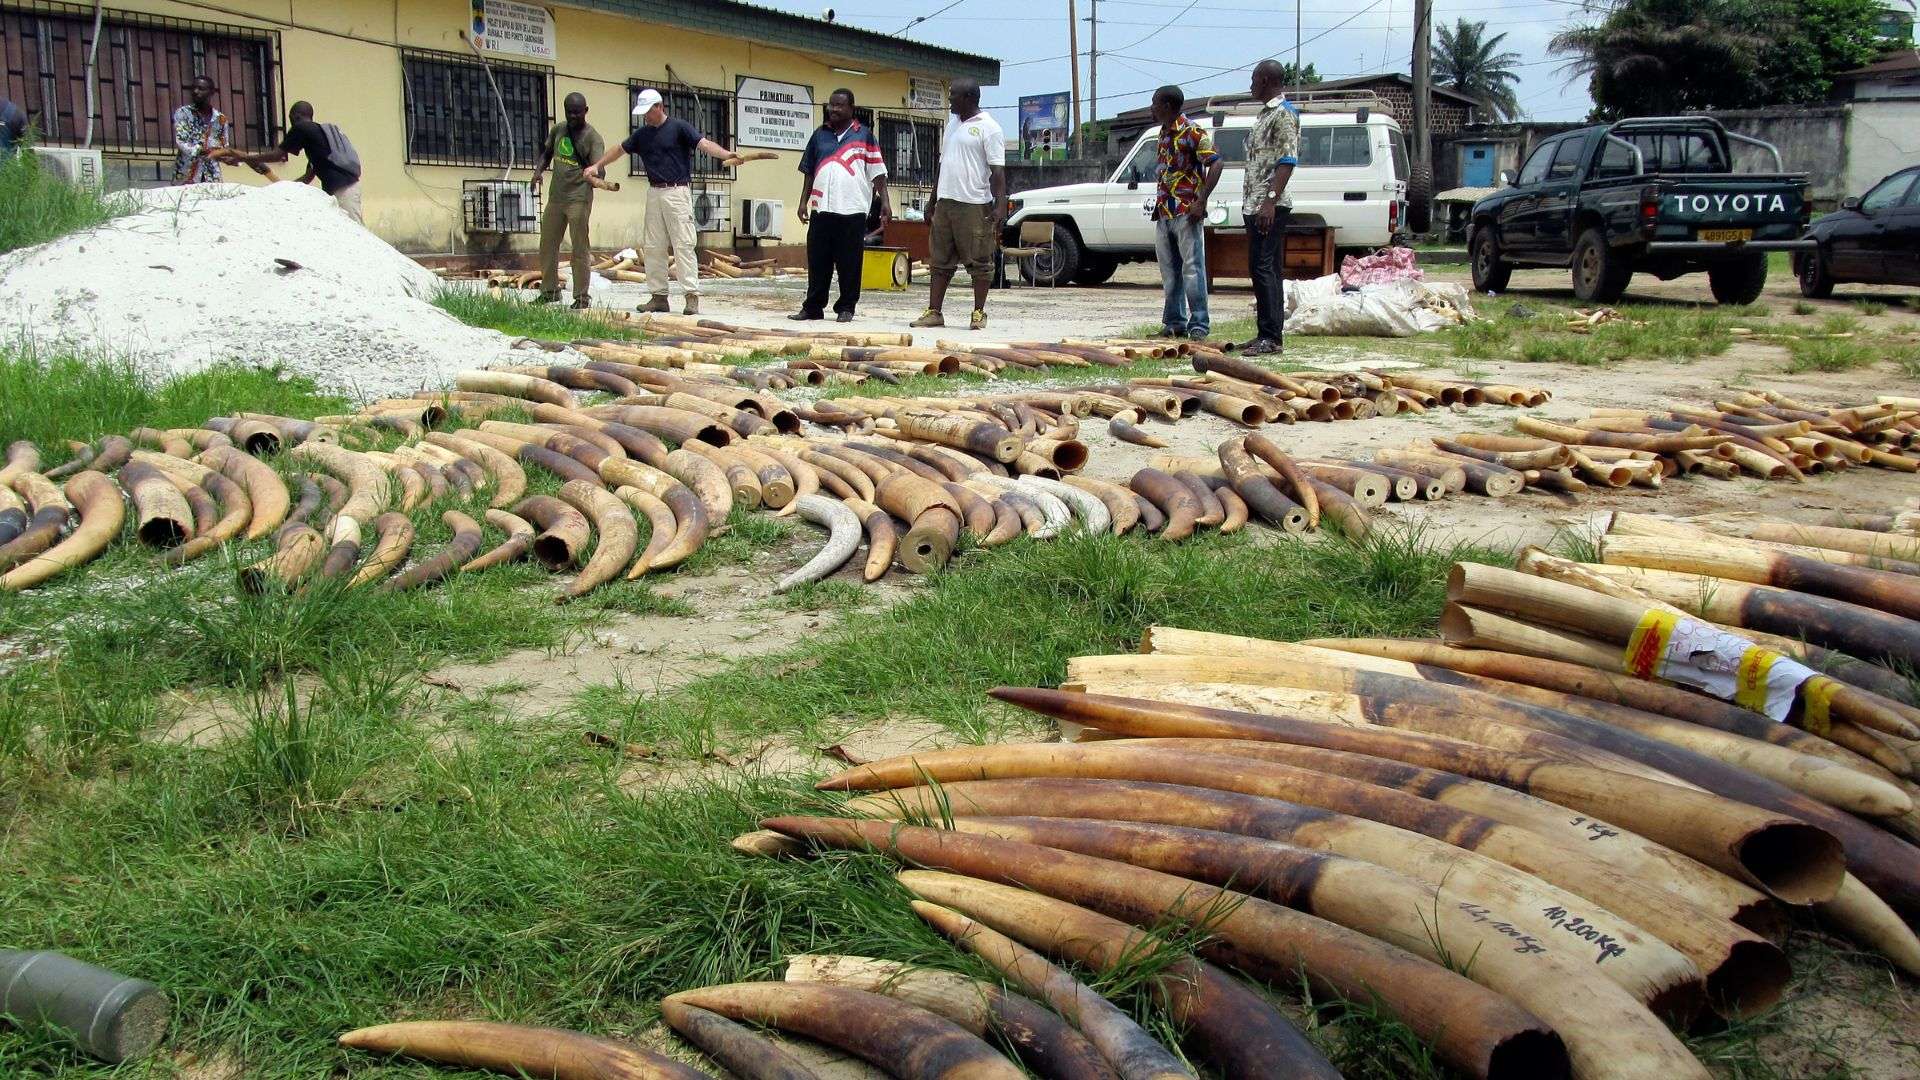 Poached ivory elephant tusks confiscated by anti-poaching patrols, Gabon, Africa.